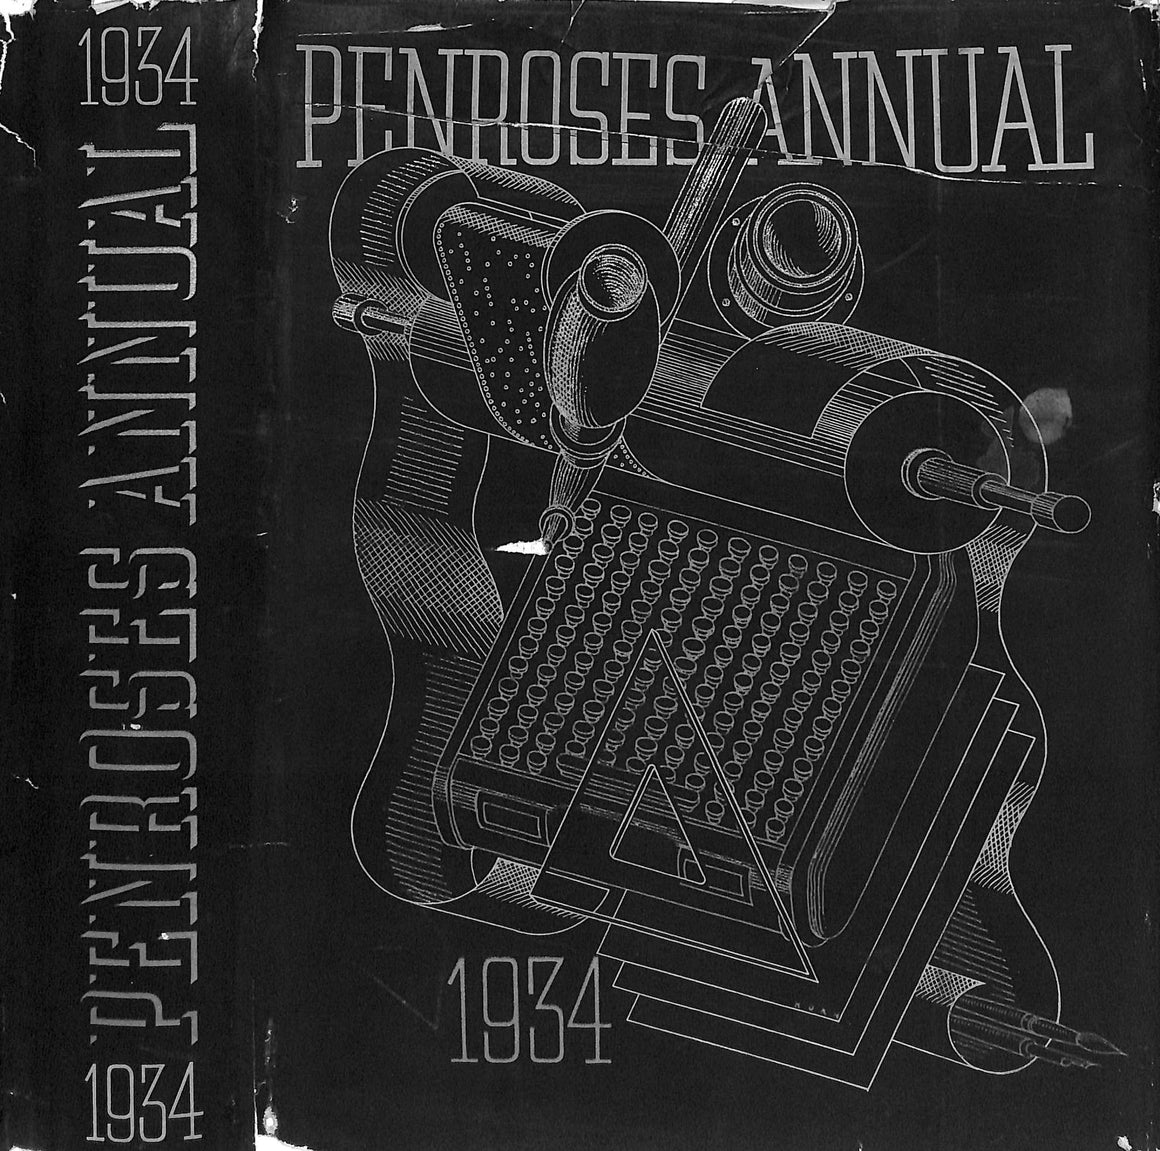 Penrose's Annual: The Process Year Book 1934